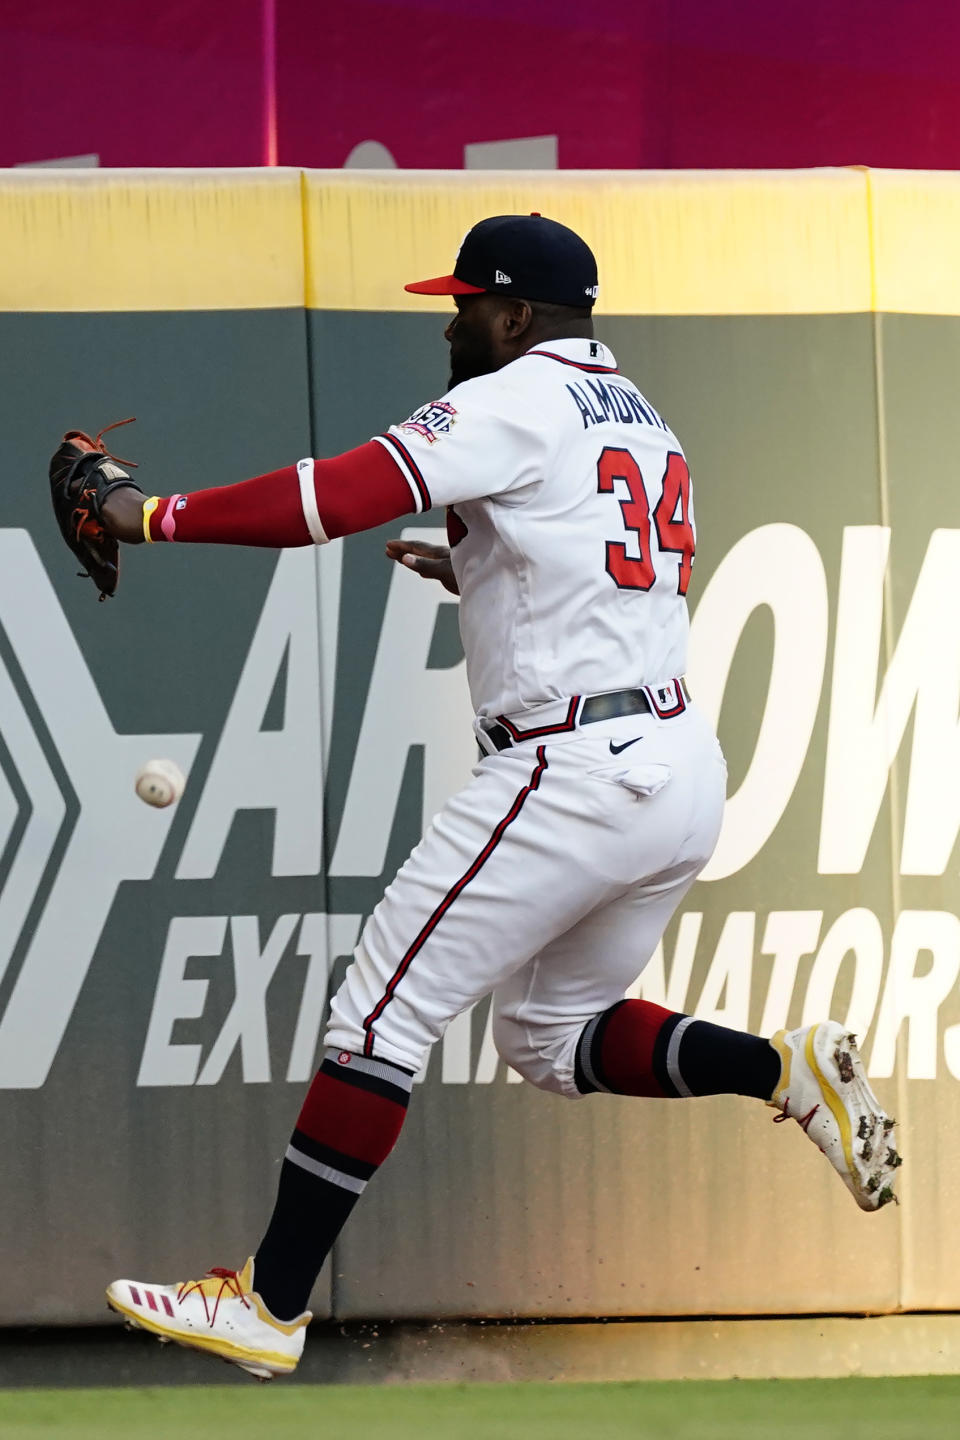 Atlanta Braves left fielder Abraham Almonte runs down a ball hit for a triple by Boston Red Sox's J.D. Martinez during the third inning of a baseball game Tuesday, June 15, 2021, in Atlanta. (AP Photo/John Bazemore)